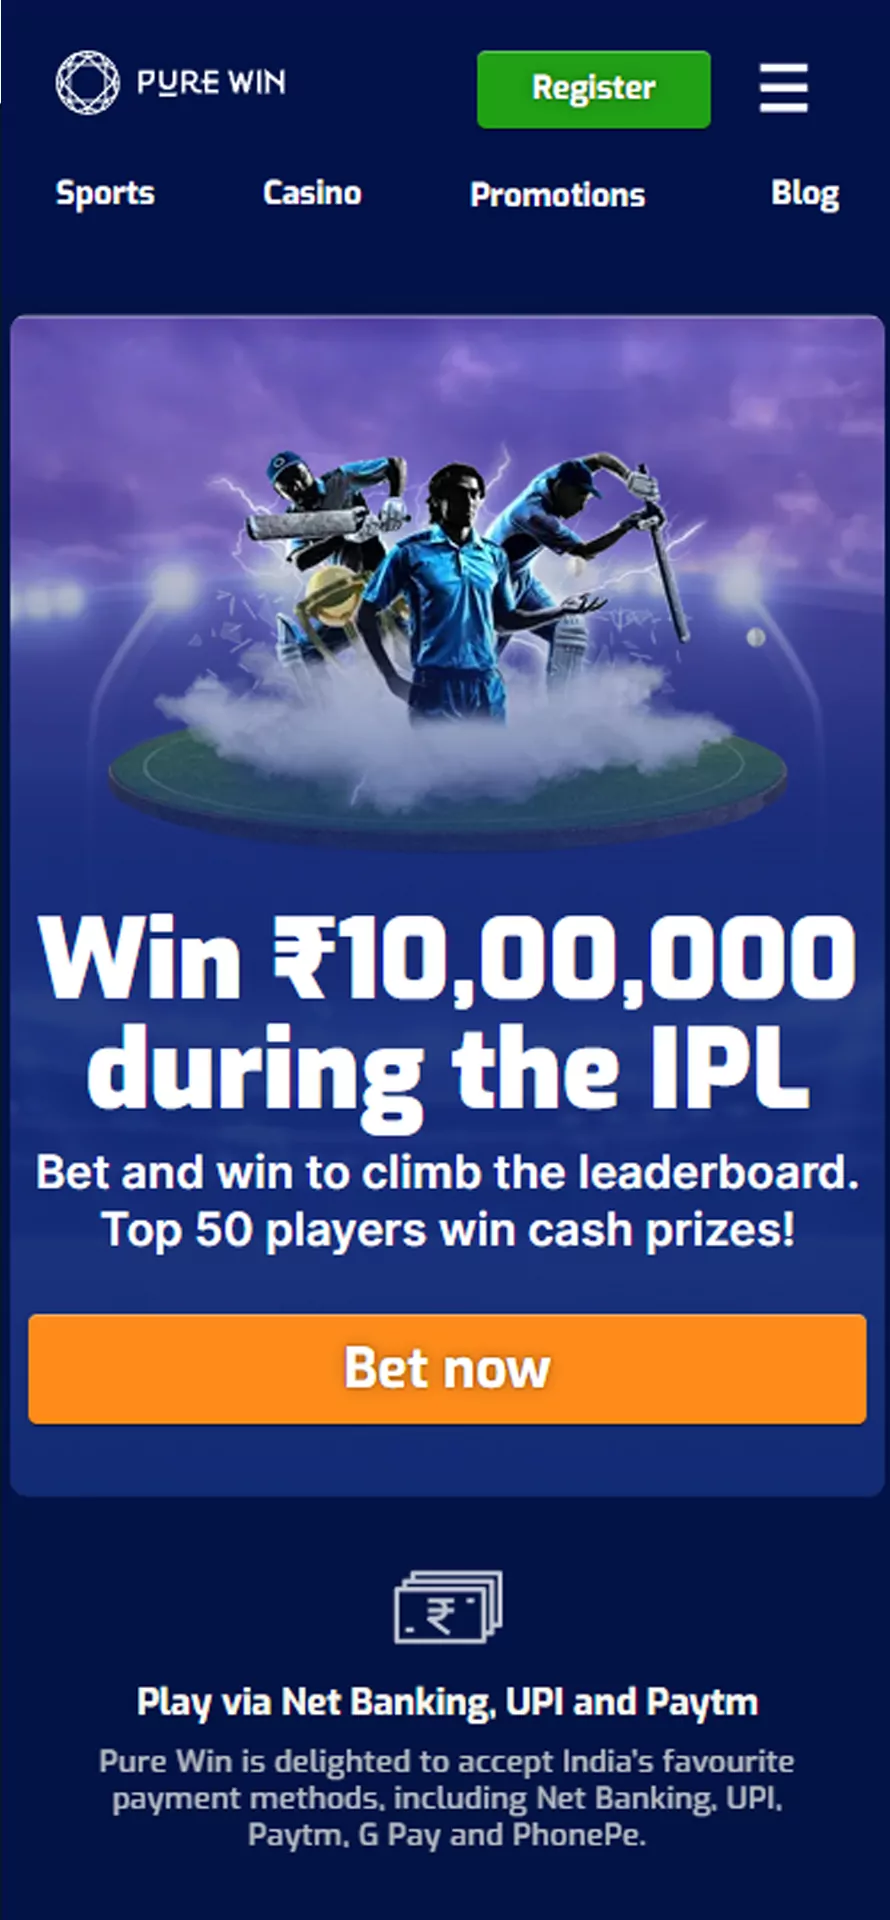 Start betting at Pure Win during IPL.